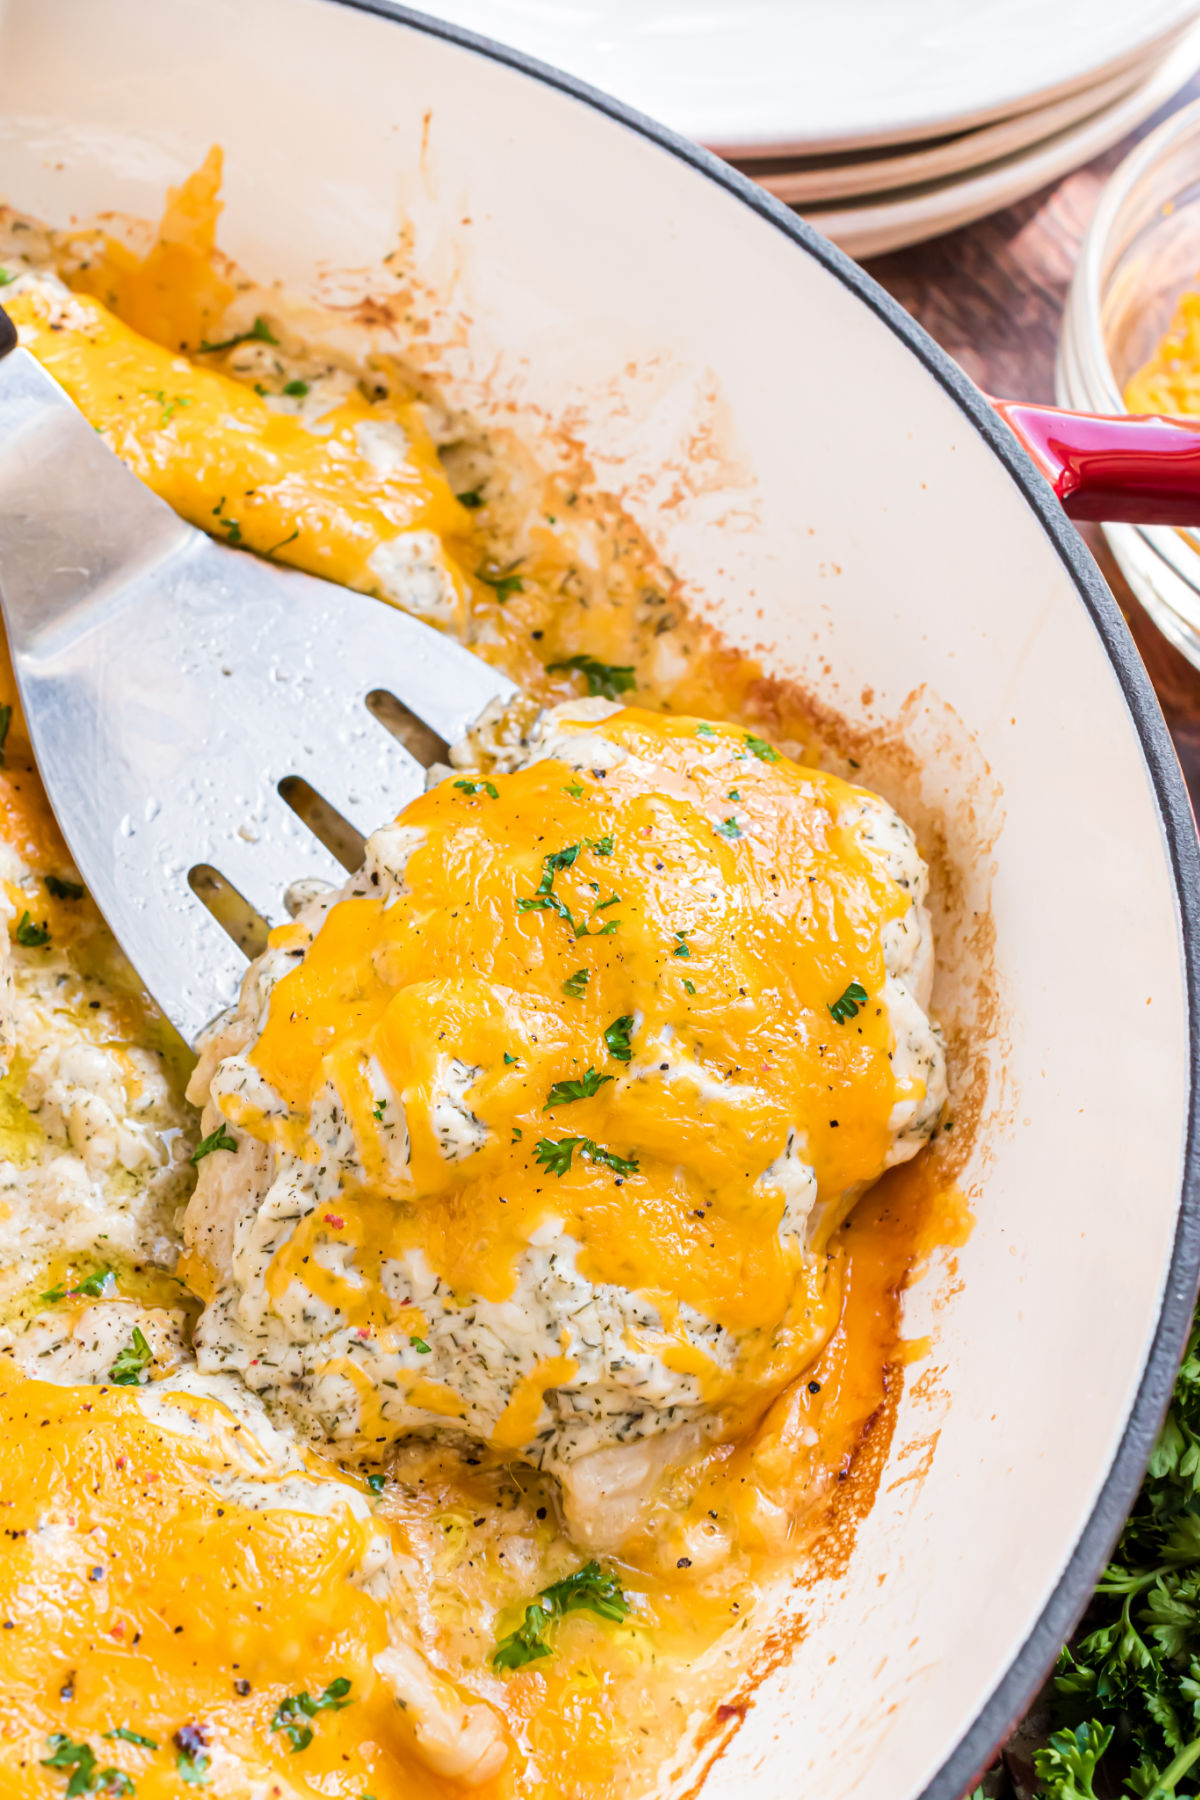 Baked chicken with ranch sauce and cheese in skillet.